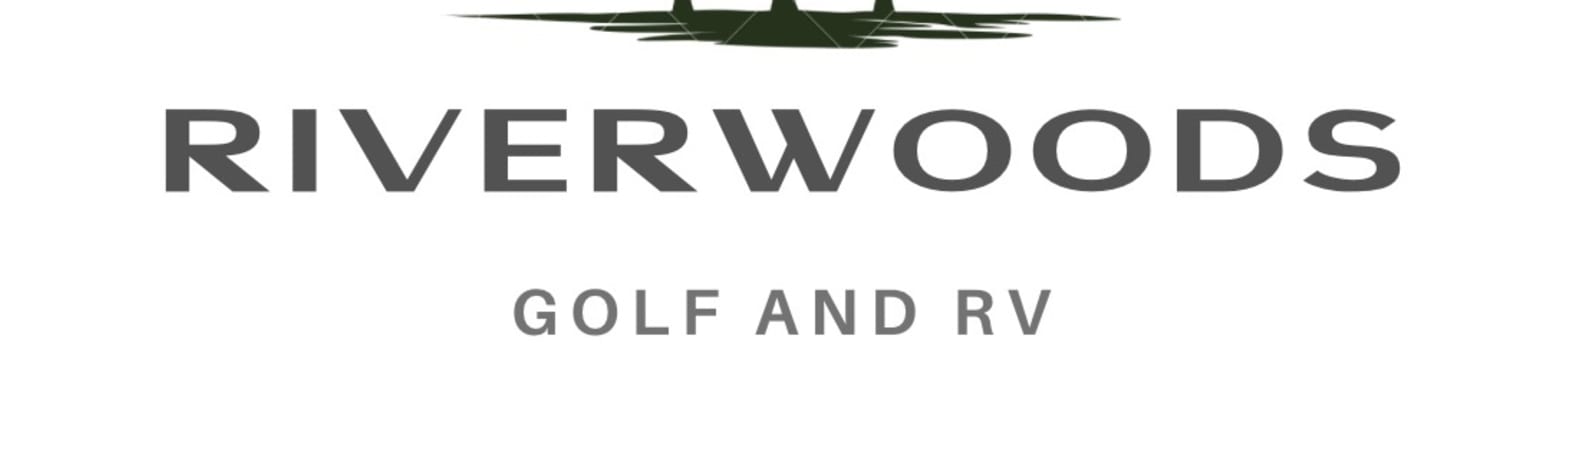 Riverwoods Golf and RV